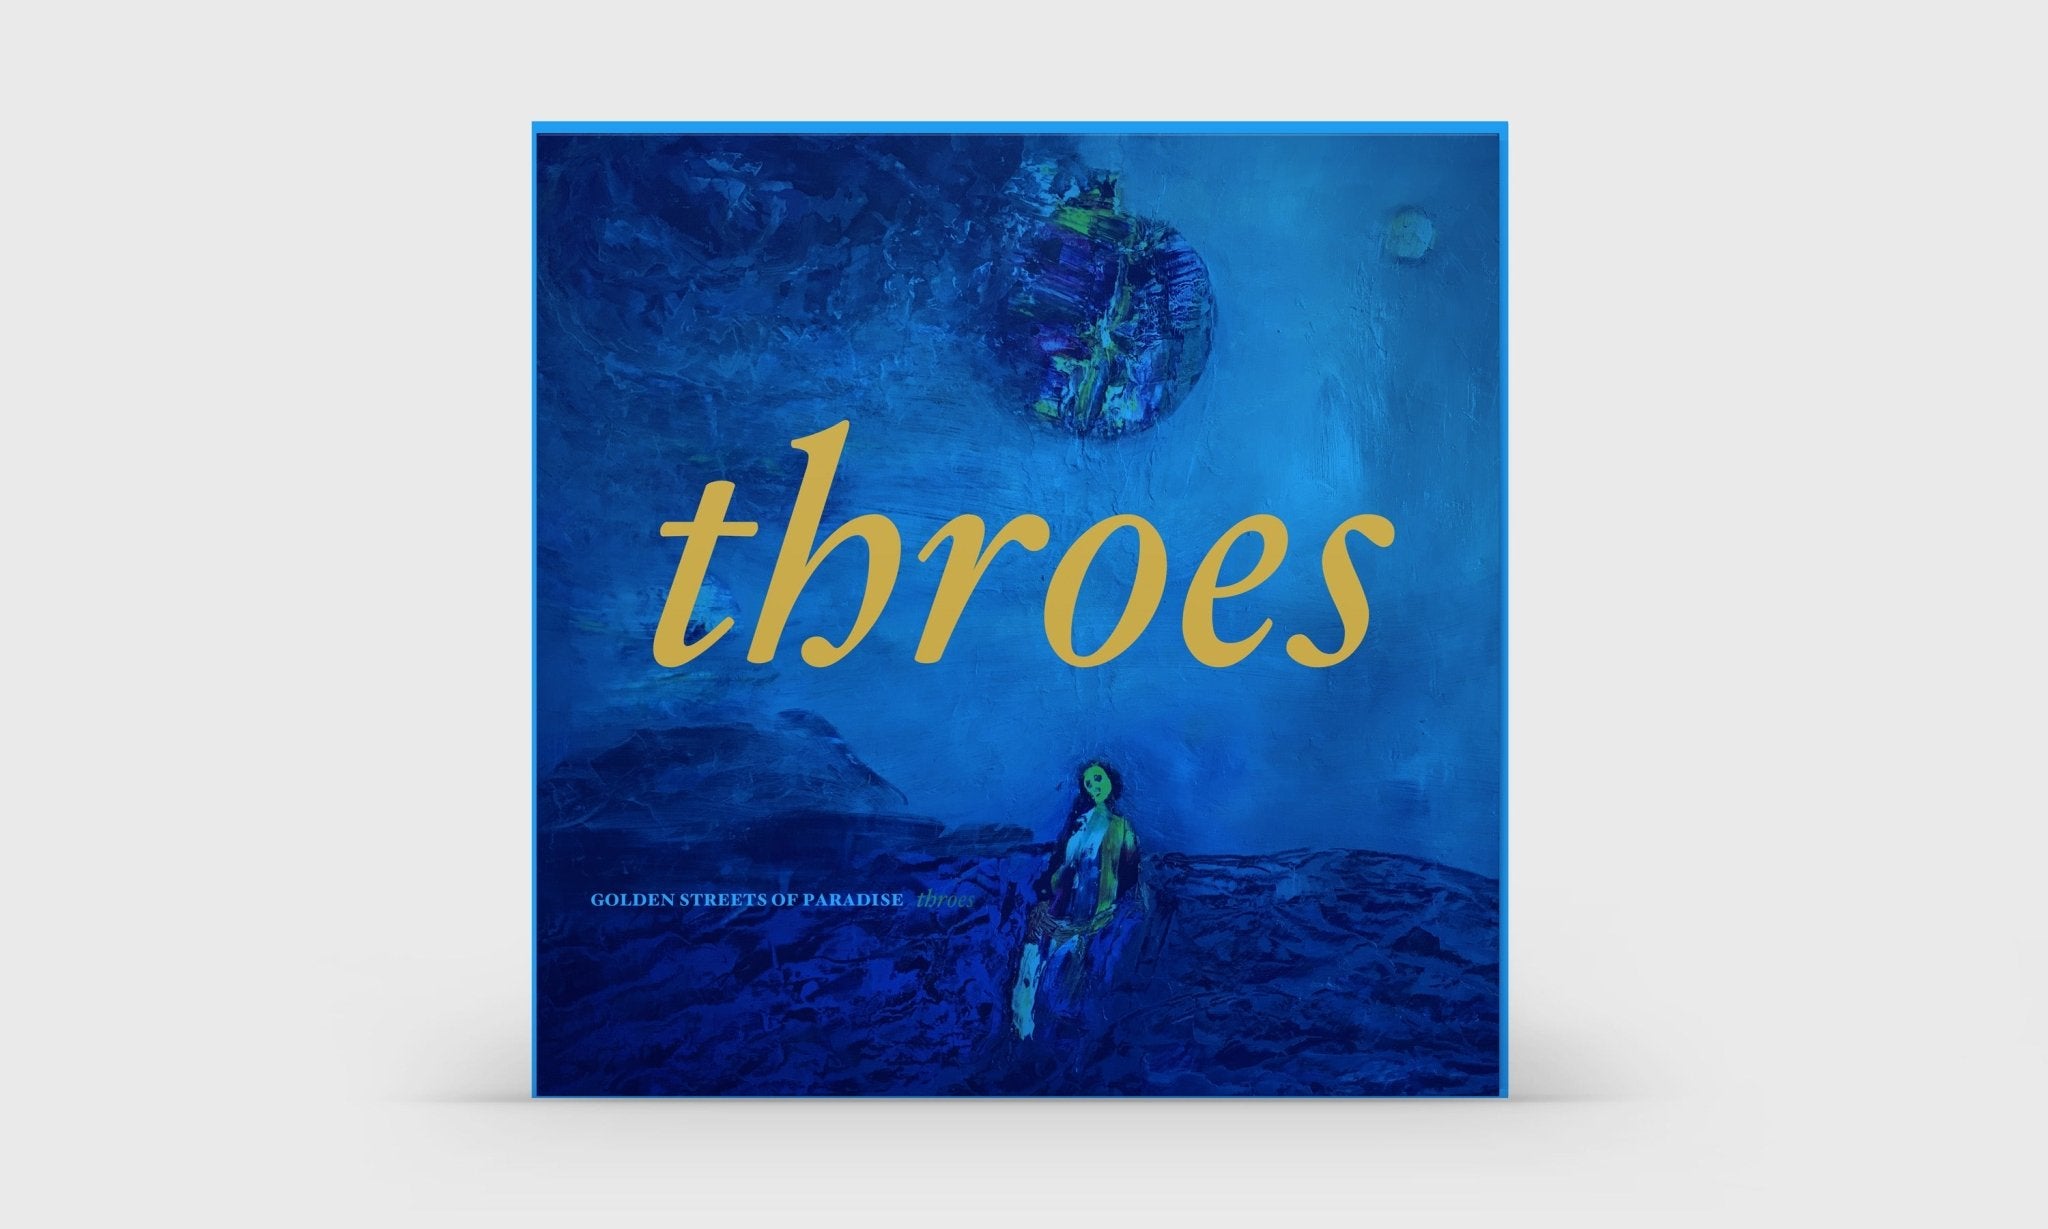 Golden Streets of Paradise: Throes: Vinyl - Steadfast Records